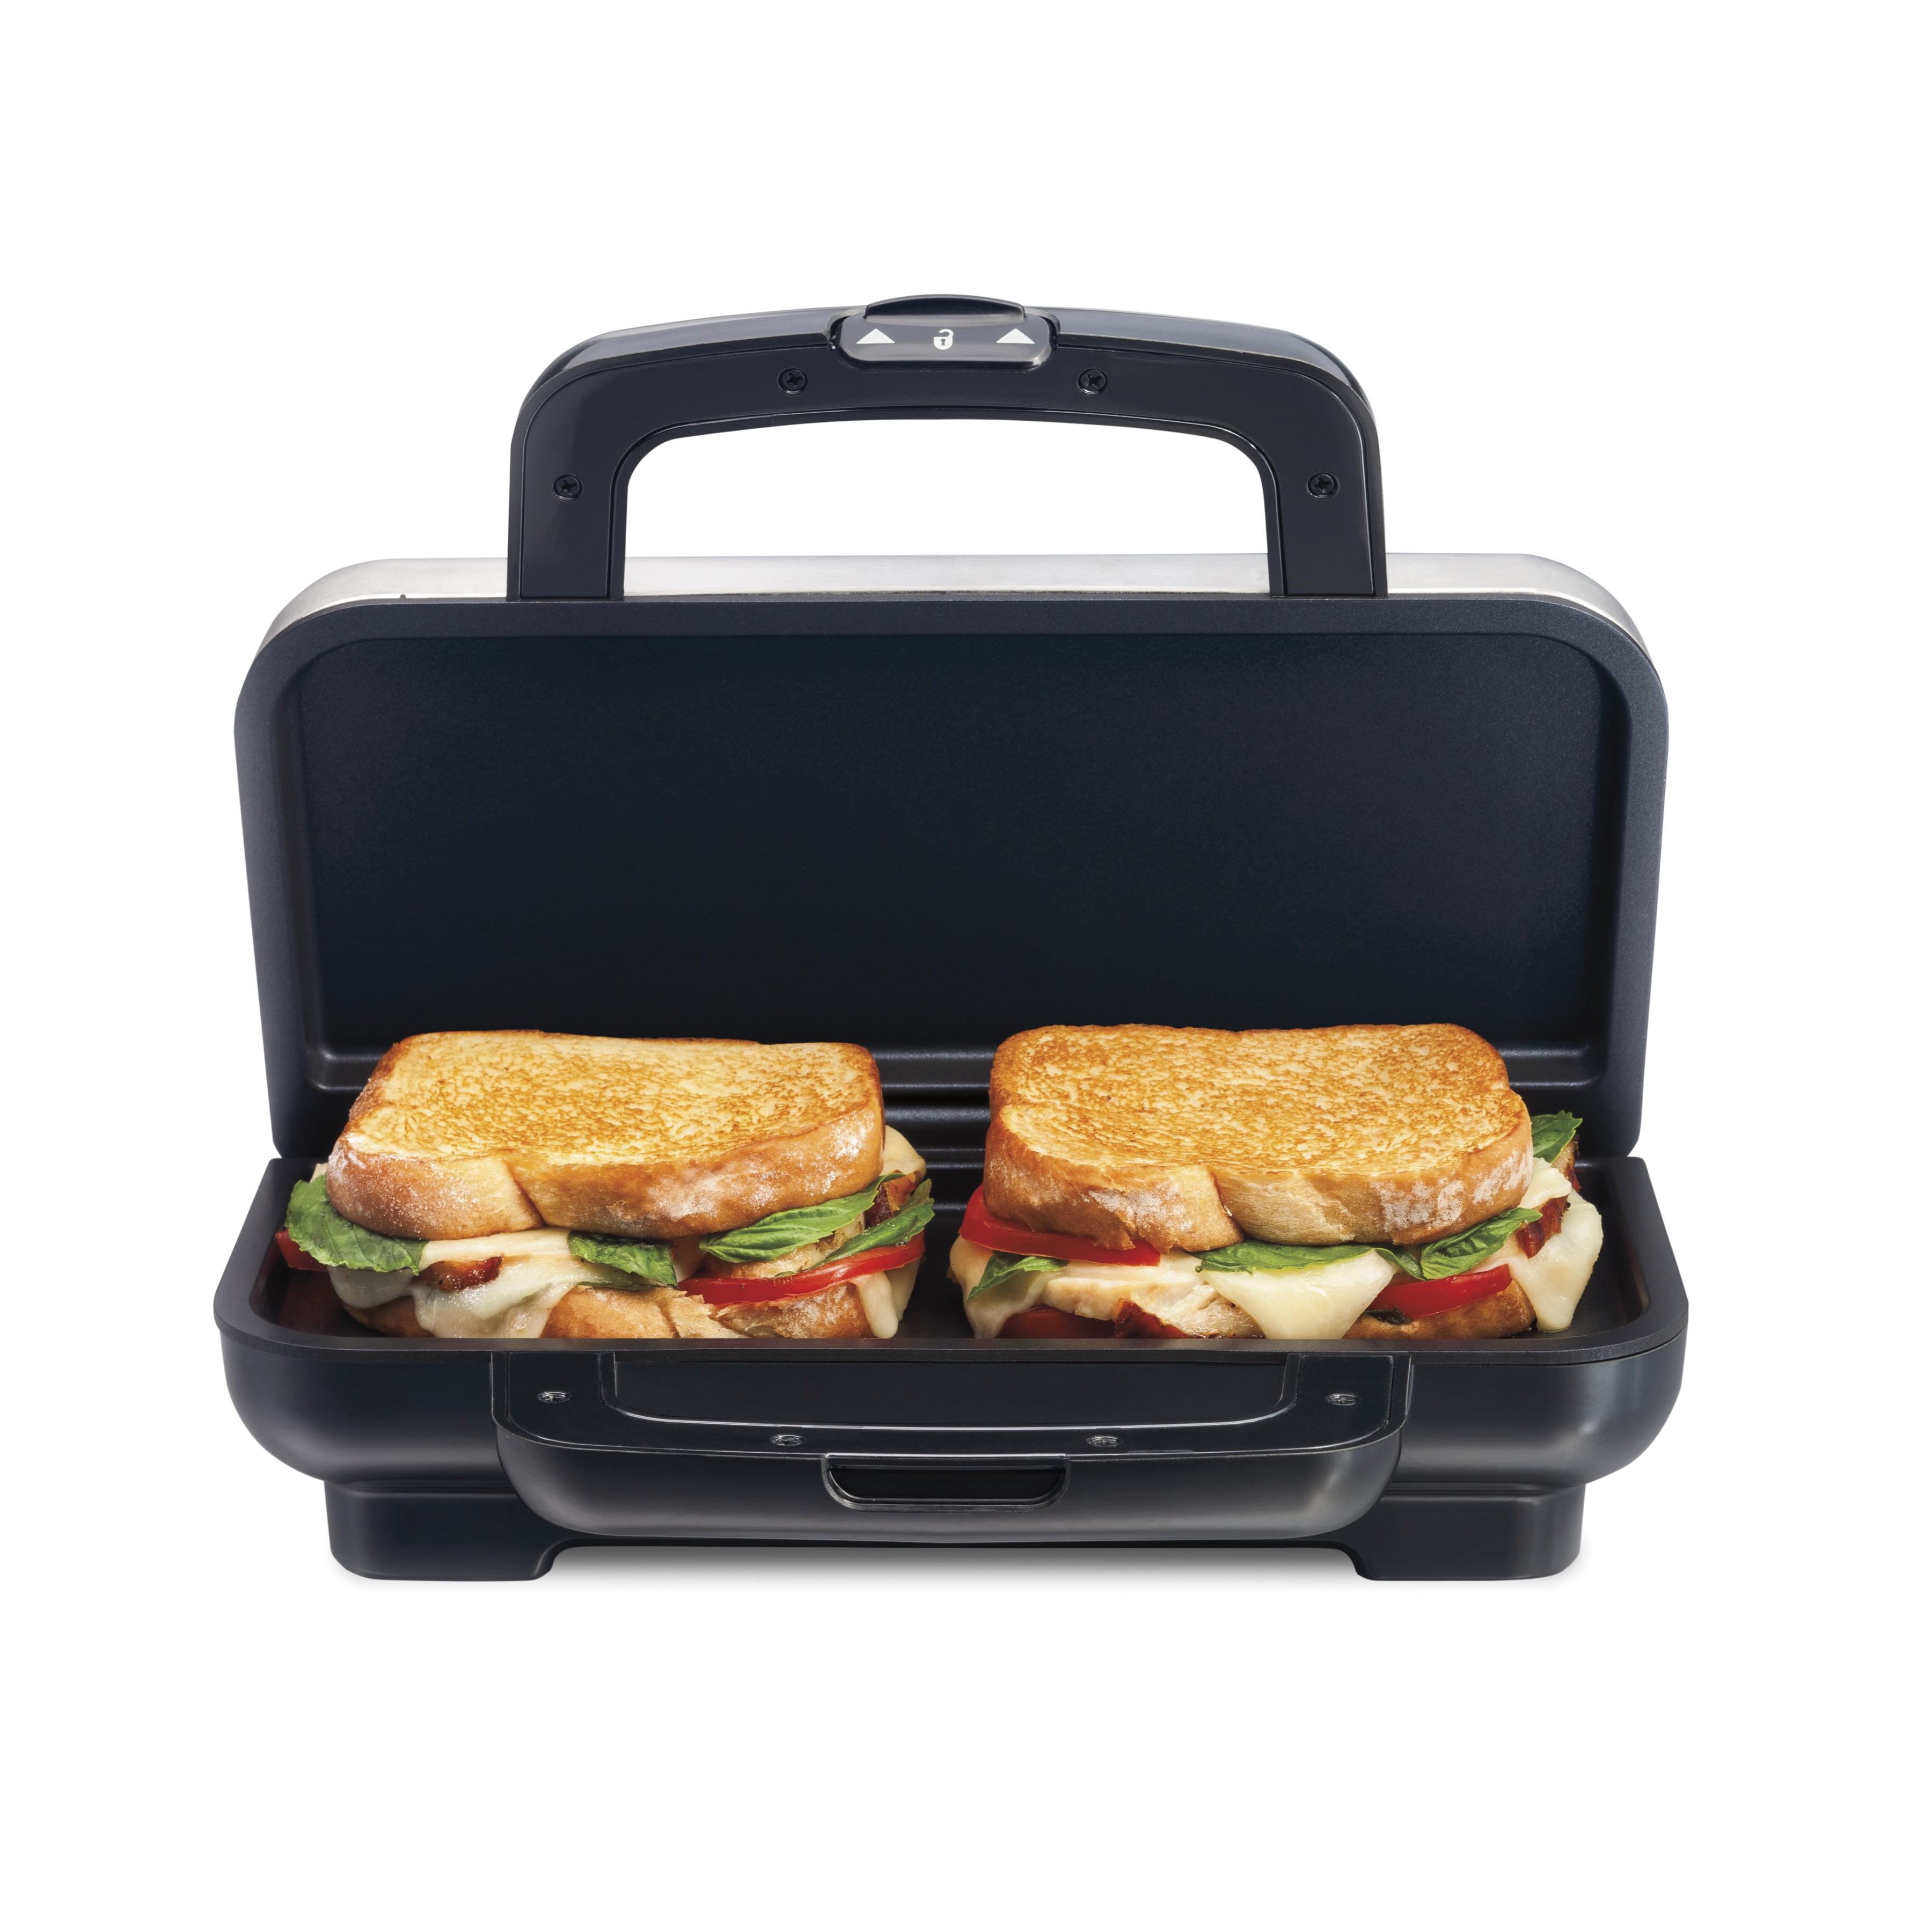 Details about   Sandwich Toaster Electric Warm Toast Maker 700 W Non Stick Stainless Steal Pan 